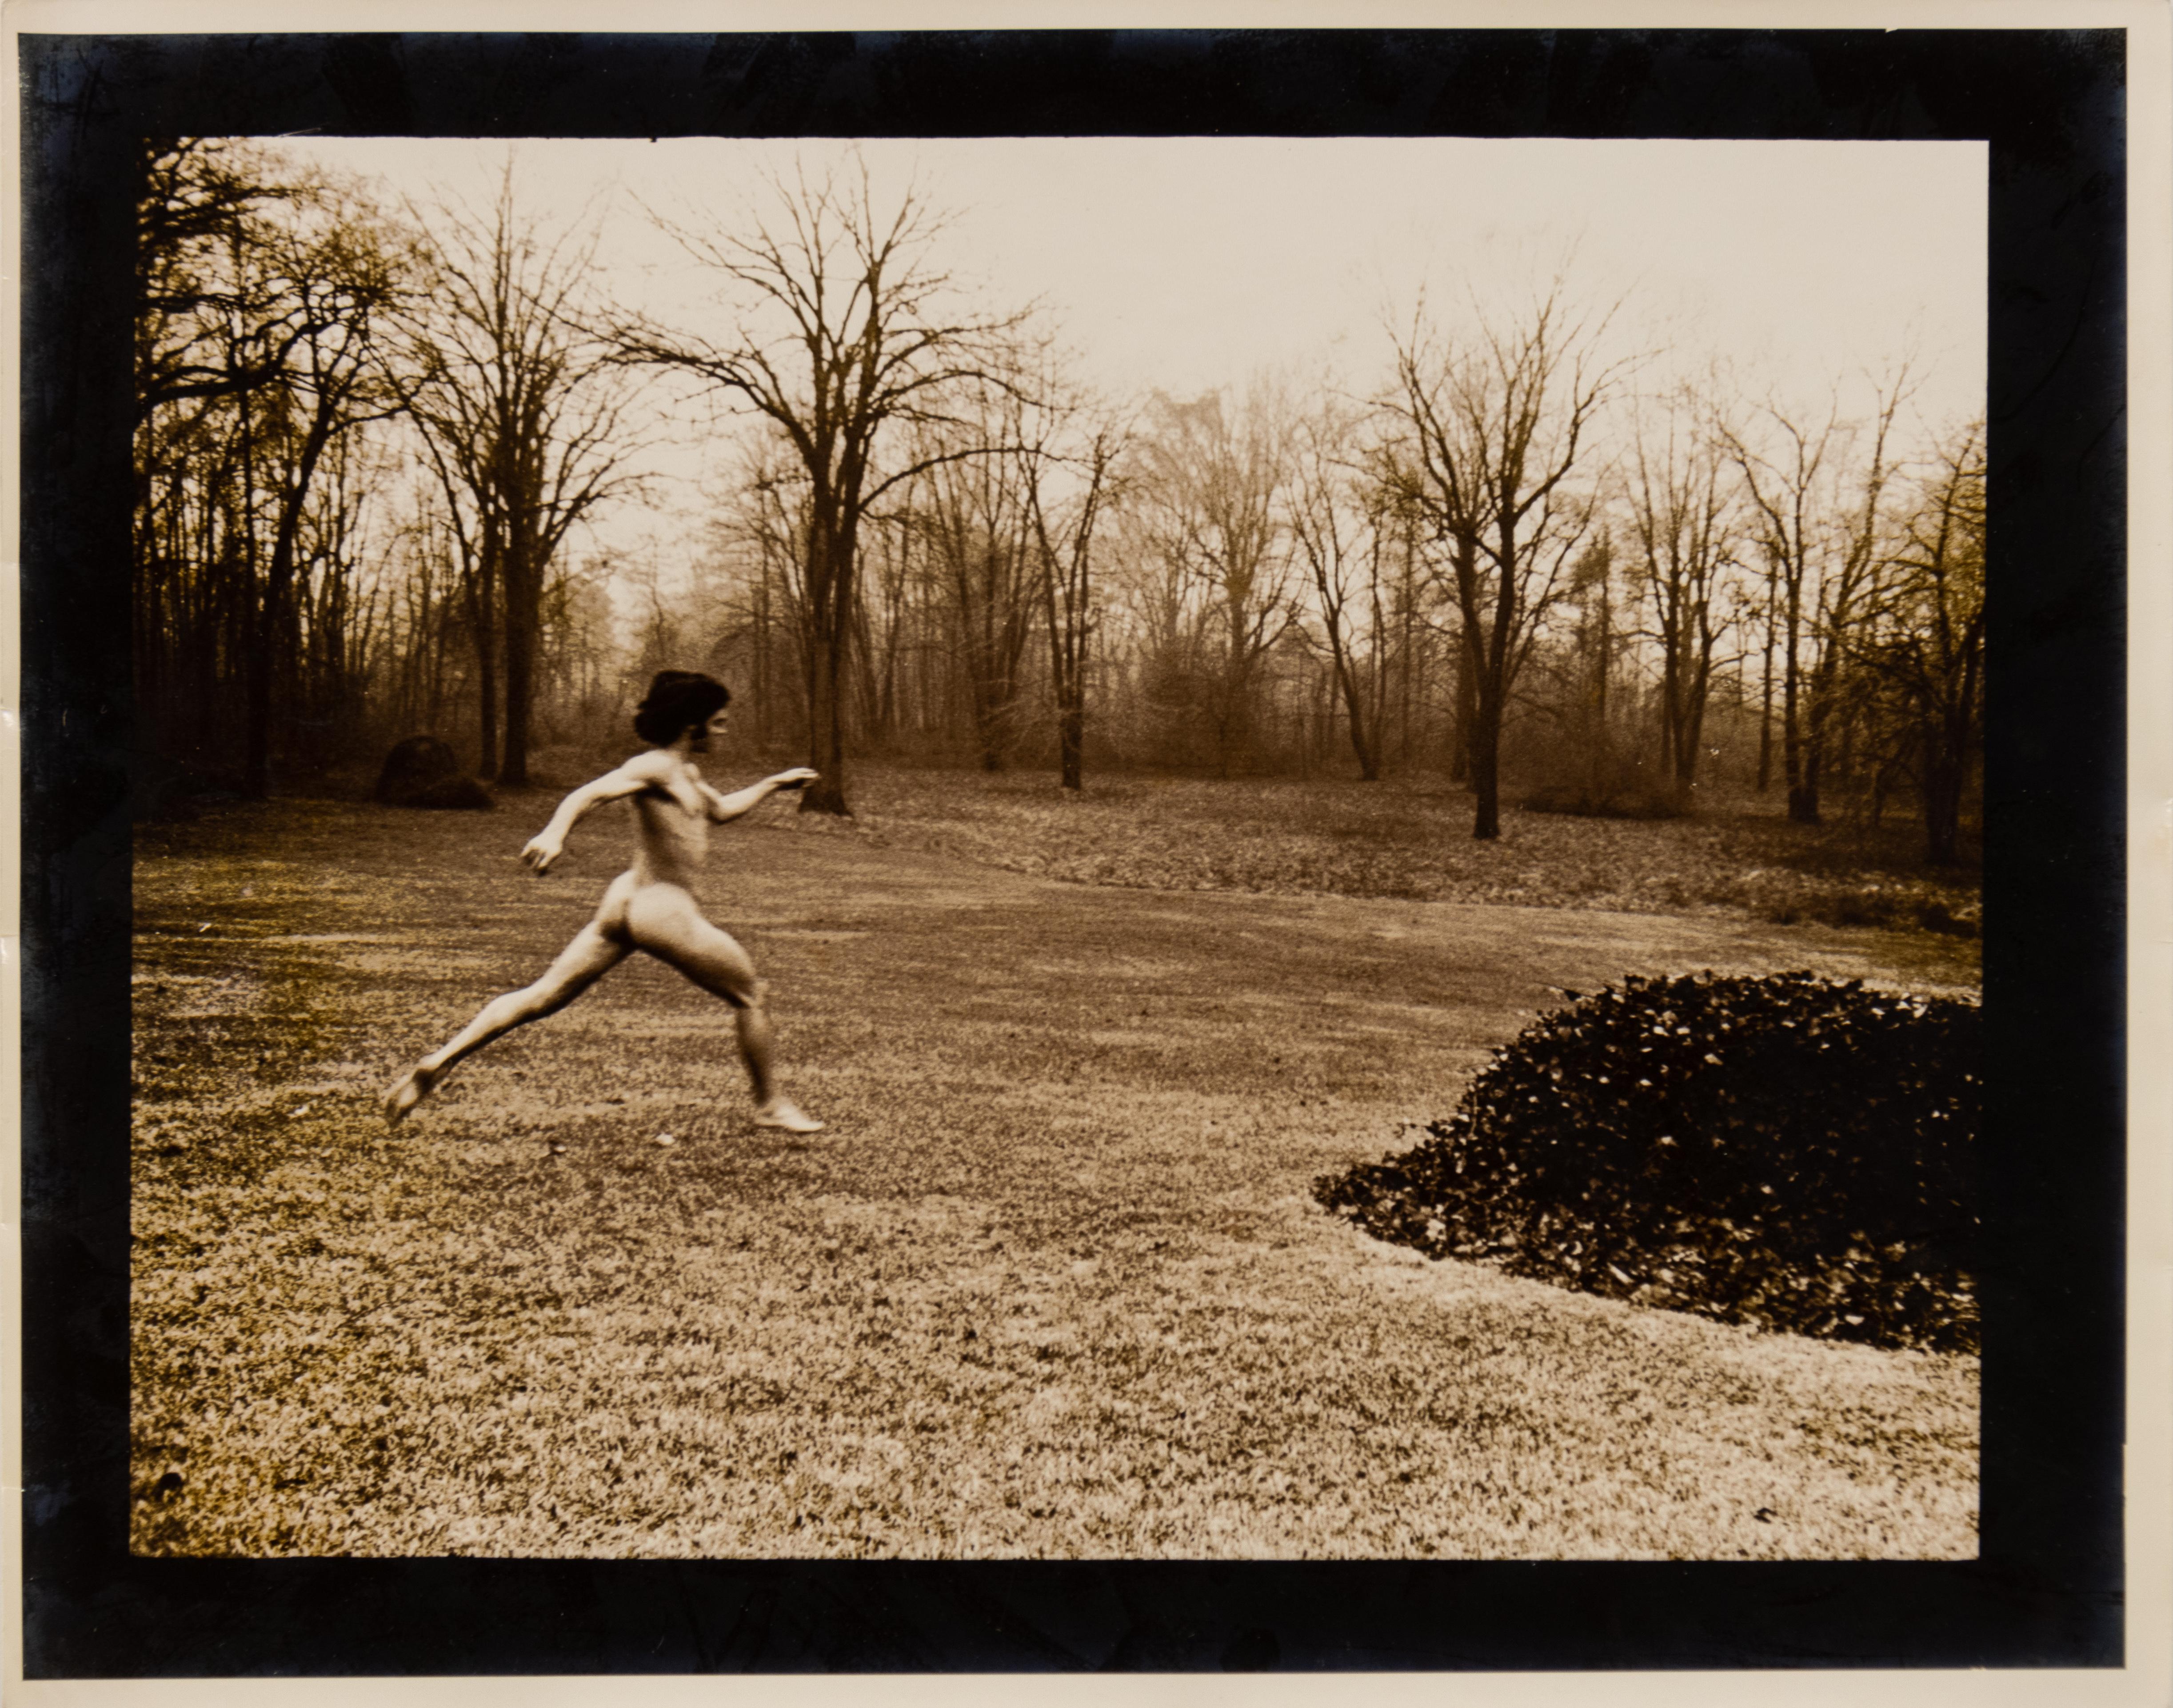 Untitled (Alan Running), Rye, NY - Photograph by Curtice Taylor